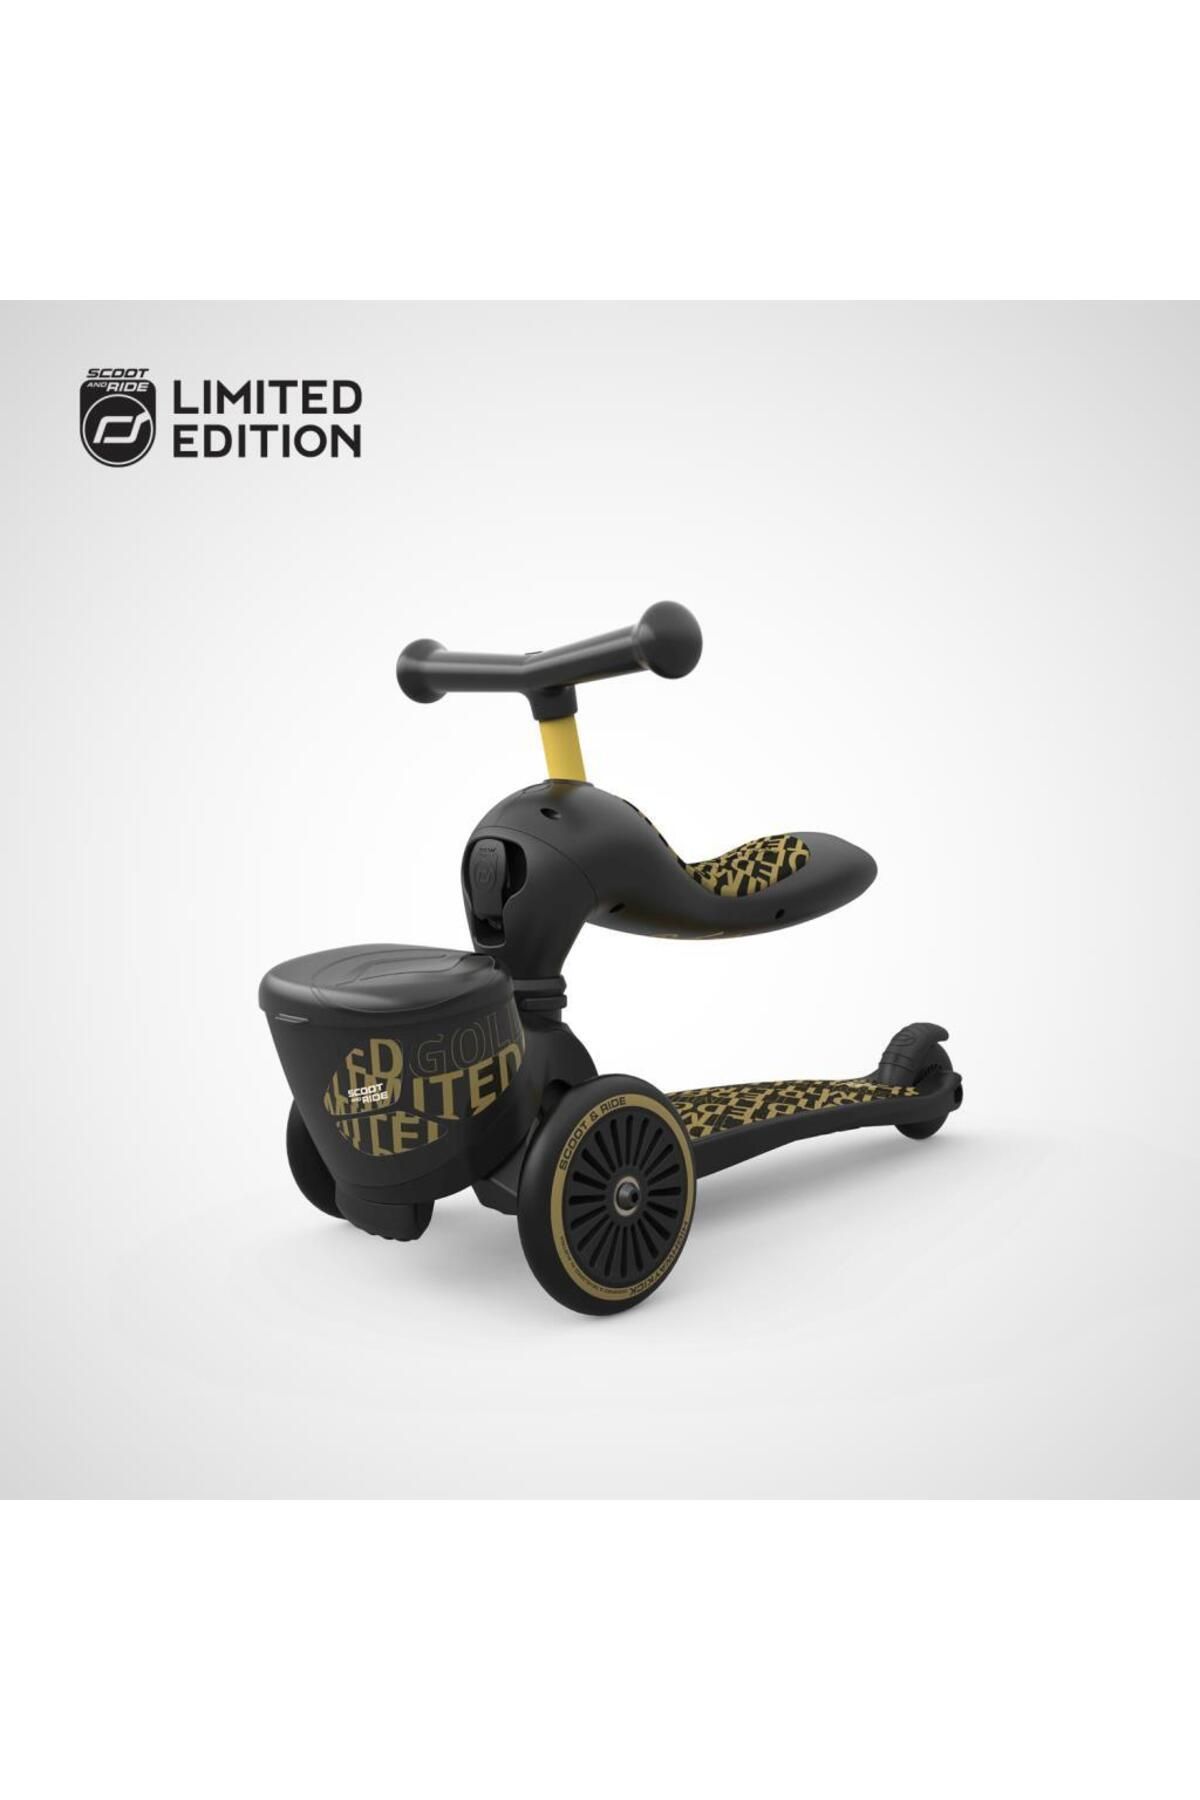 SCOOT AND RIDE Highwaykick 1 Lifestyle Scooter - Black Limited Edition 210621-96530